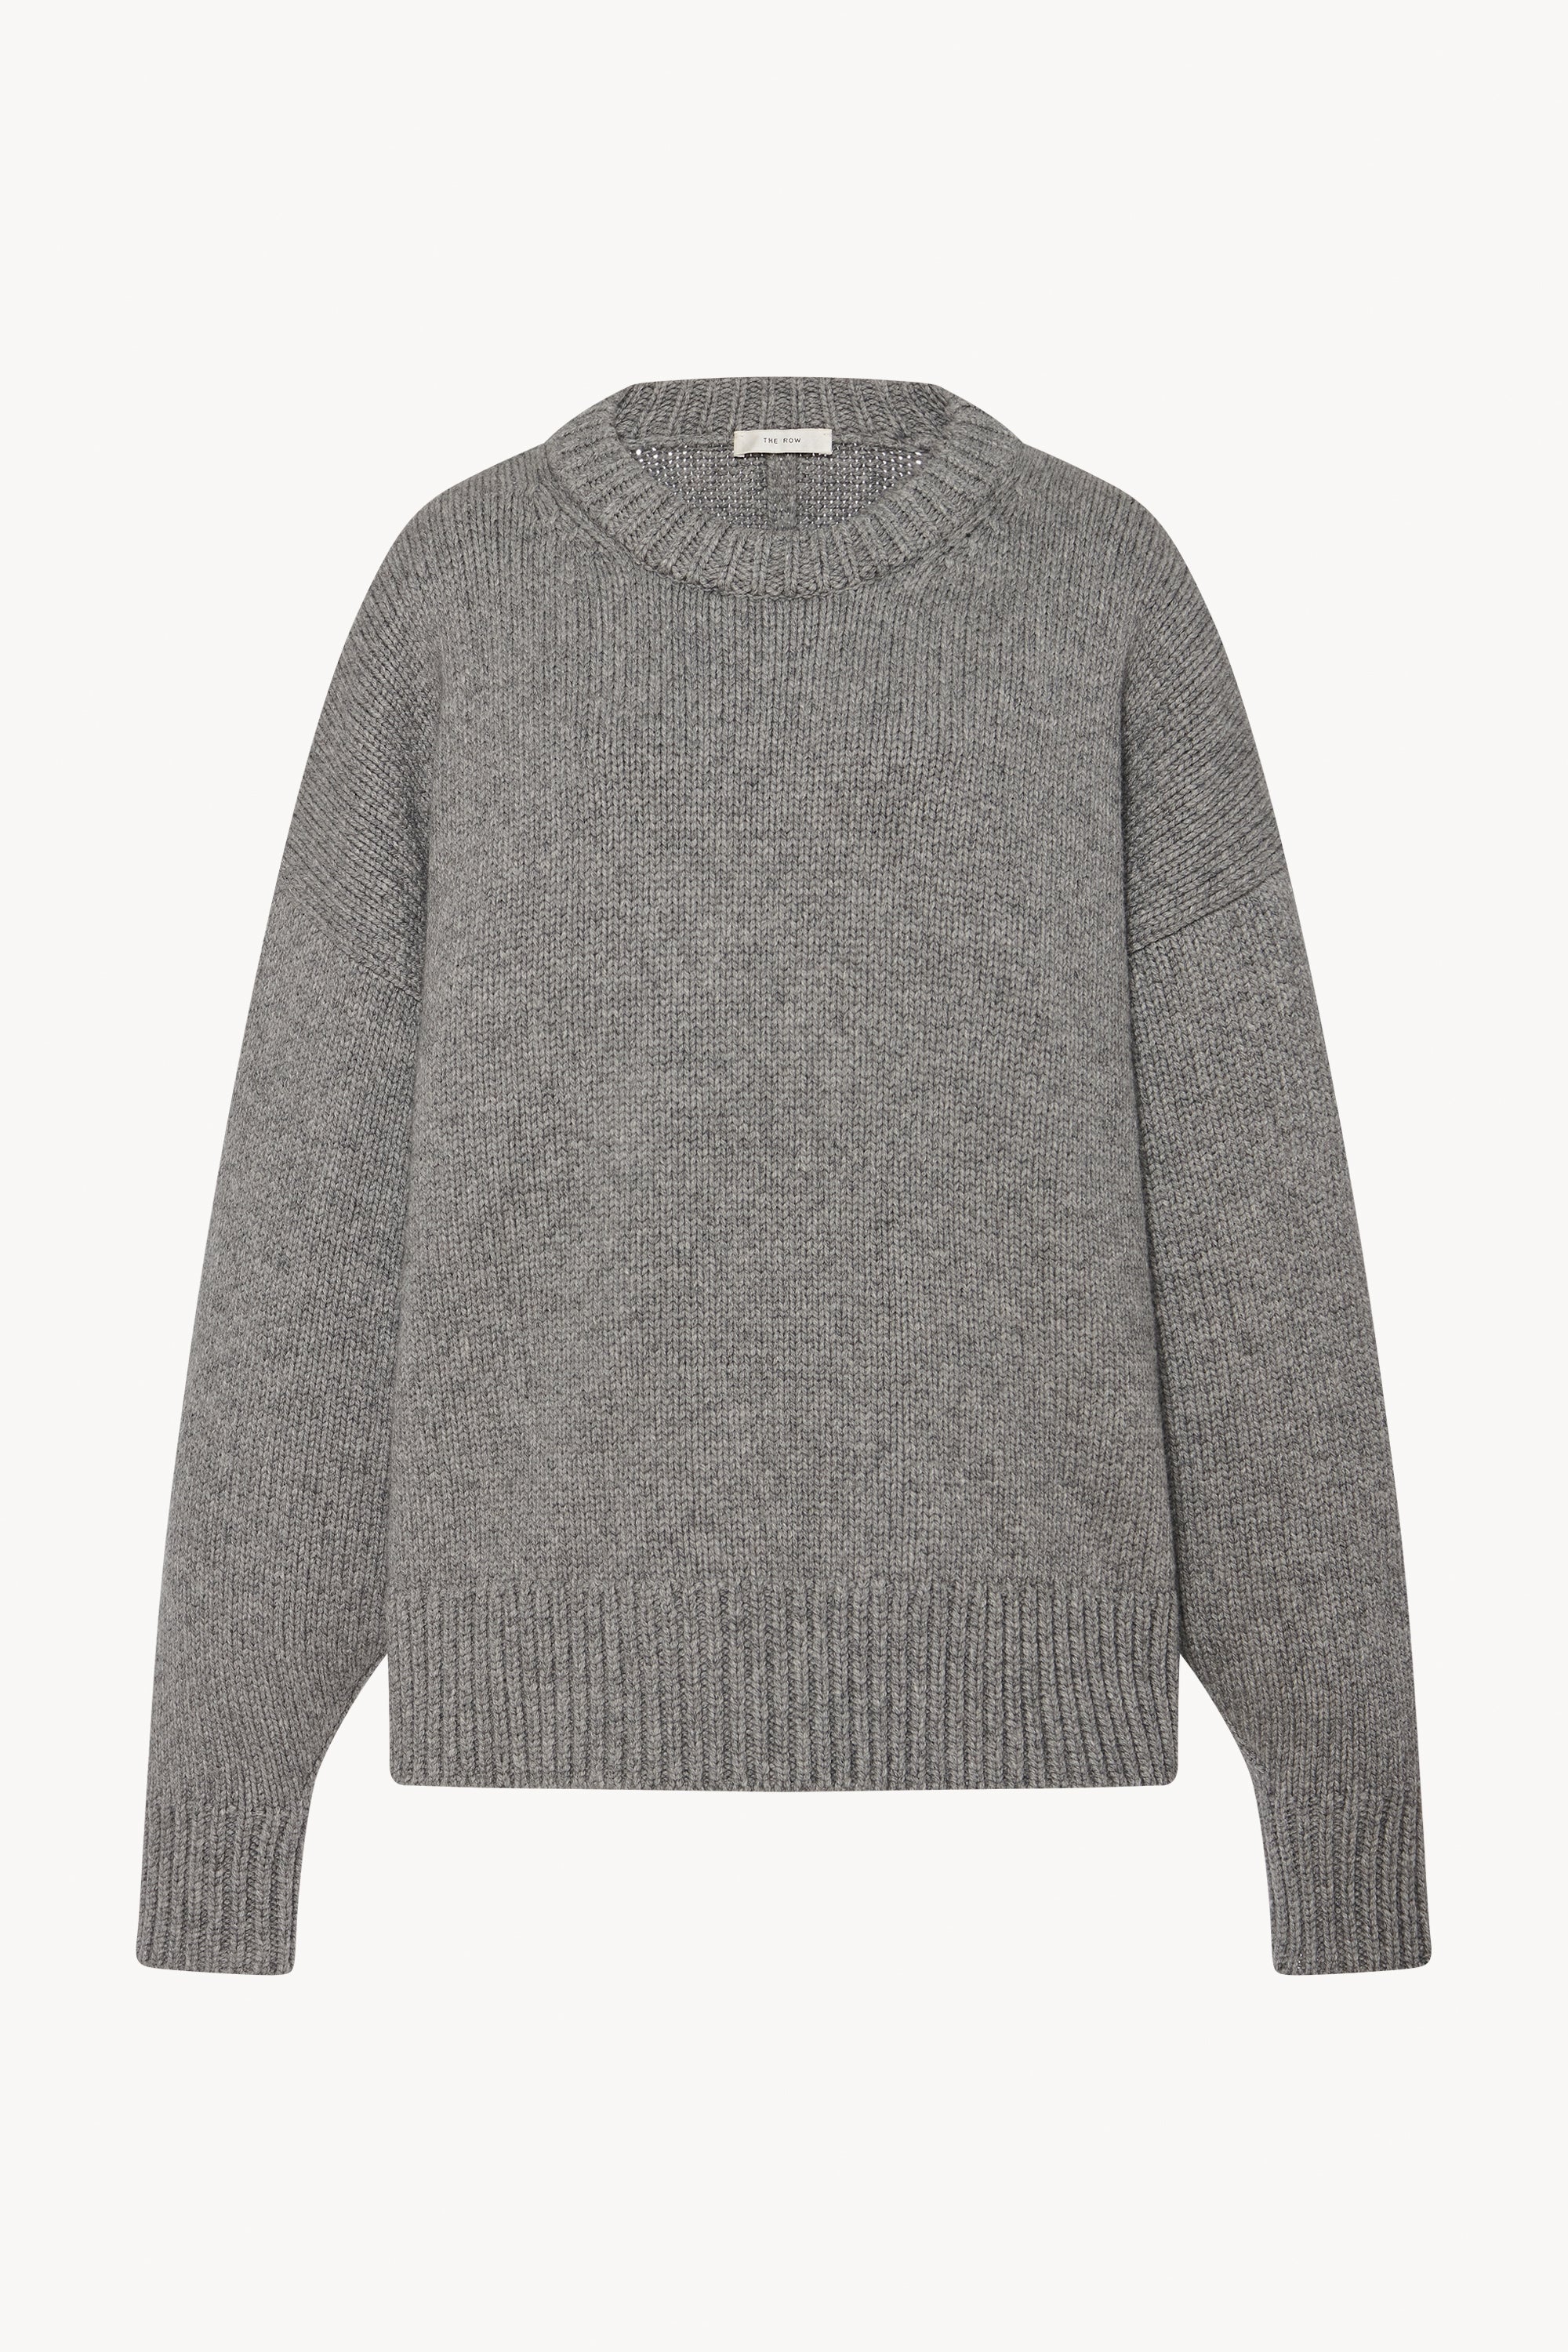 Ophelia Top Grey in Wool and Cashmere – The Row